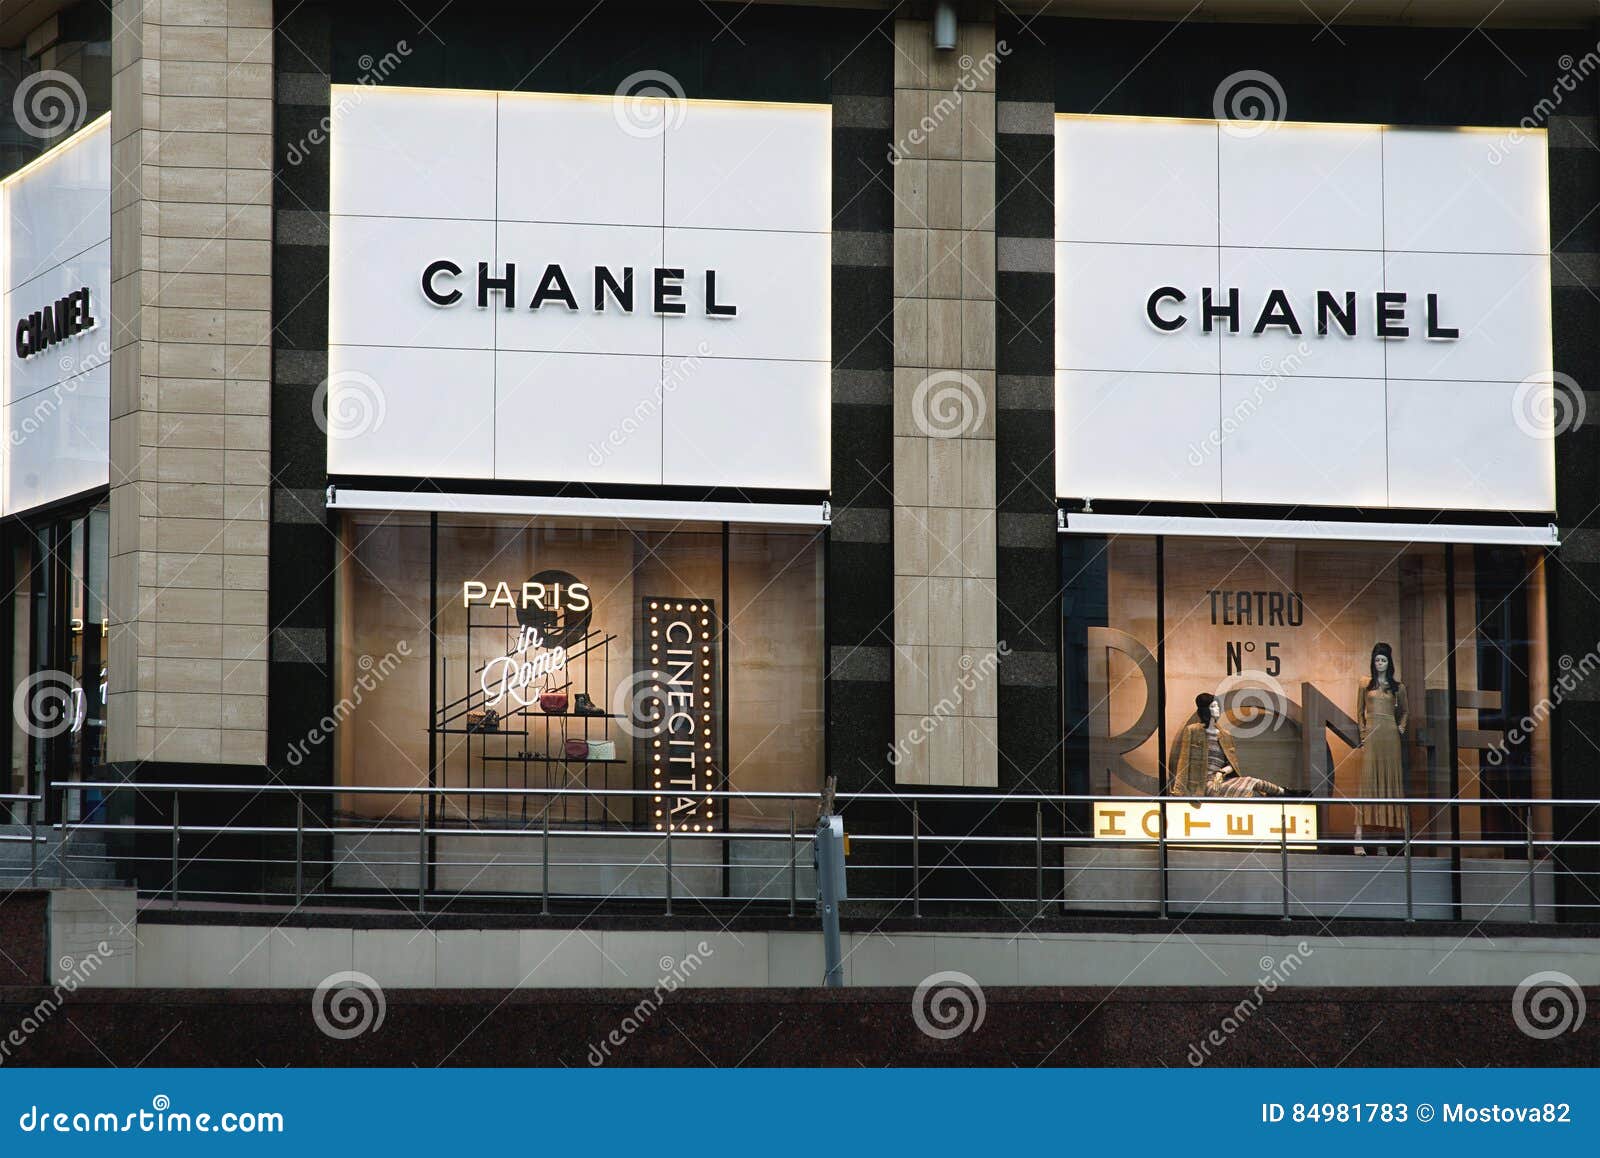 Chanel Boutique Store Entrance At Dubai International Airport Editorial ...